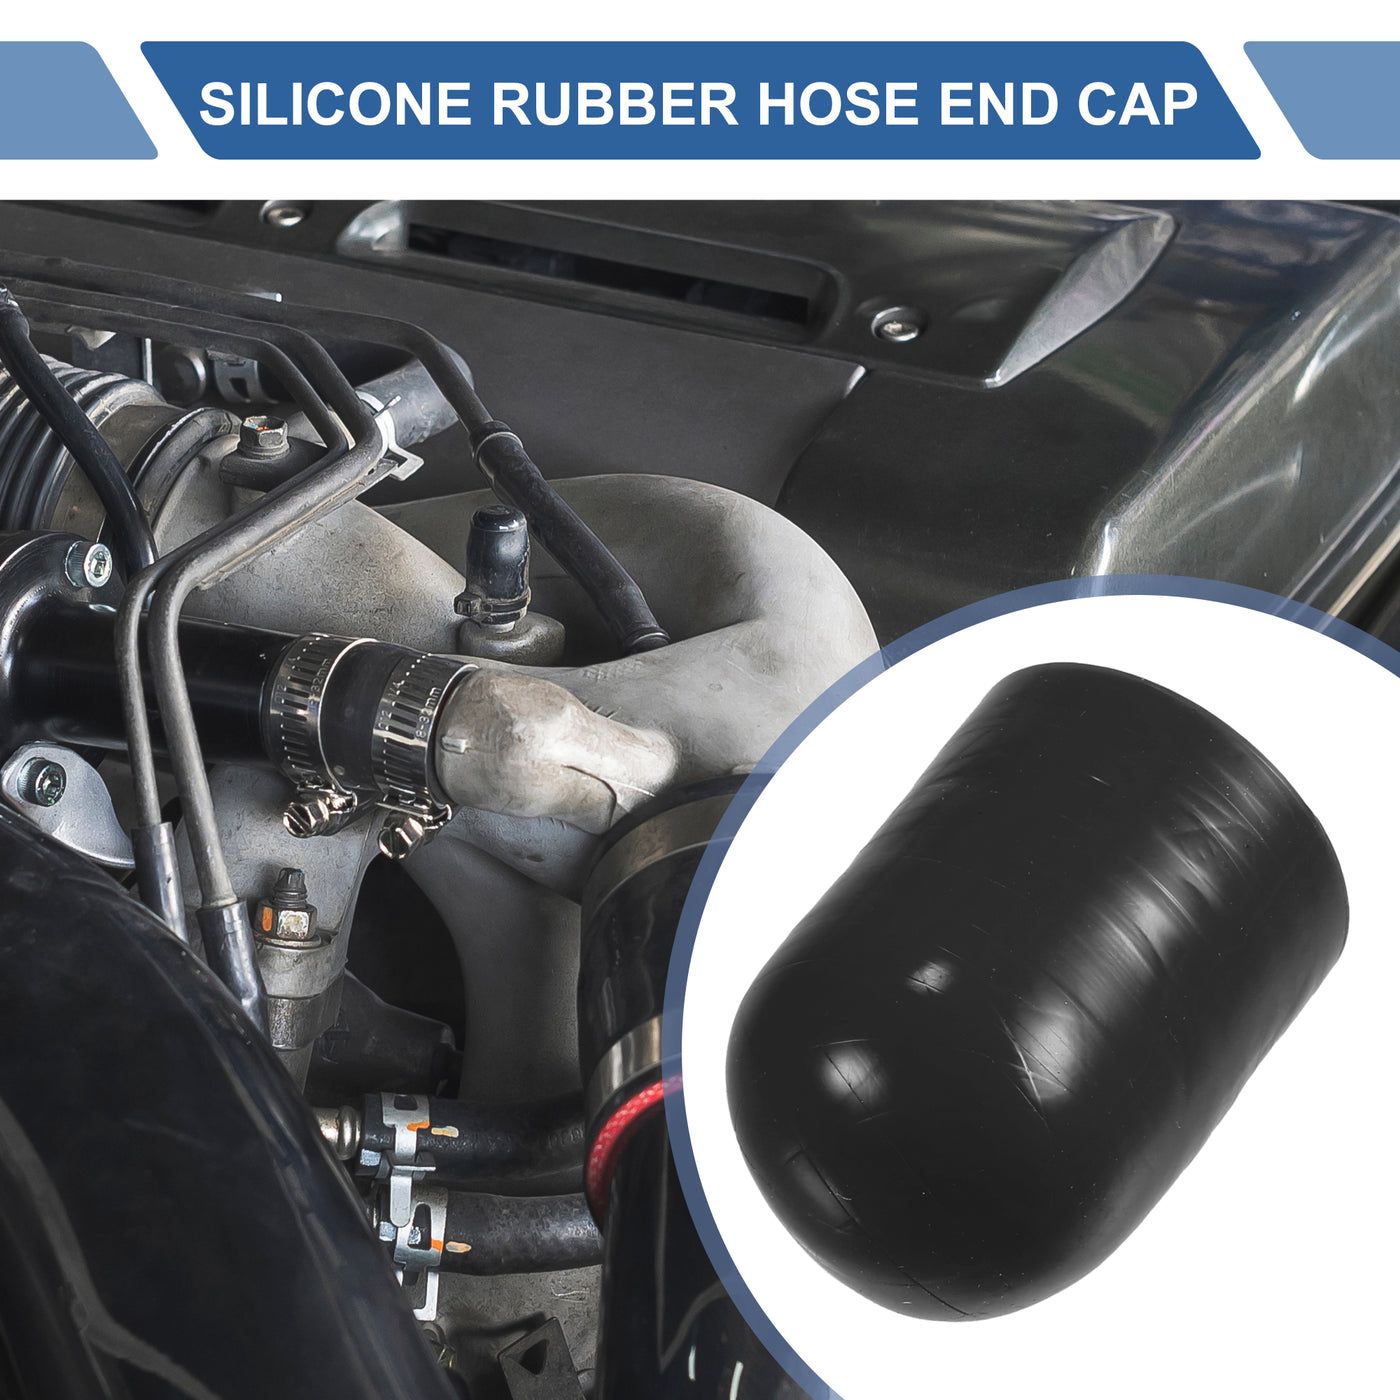 X AUTOHAUX 1 Set 30mm Length 25mm/0.98" ID Black Car Silicone Rubber Hose End Cap with Clamps Silicone Reinforced Blanking Cap for Bypass Tube Universal